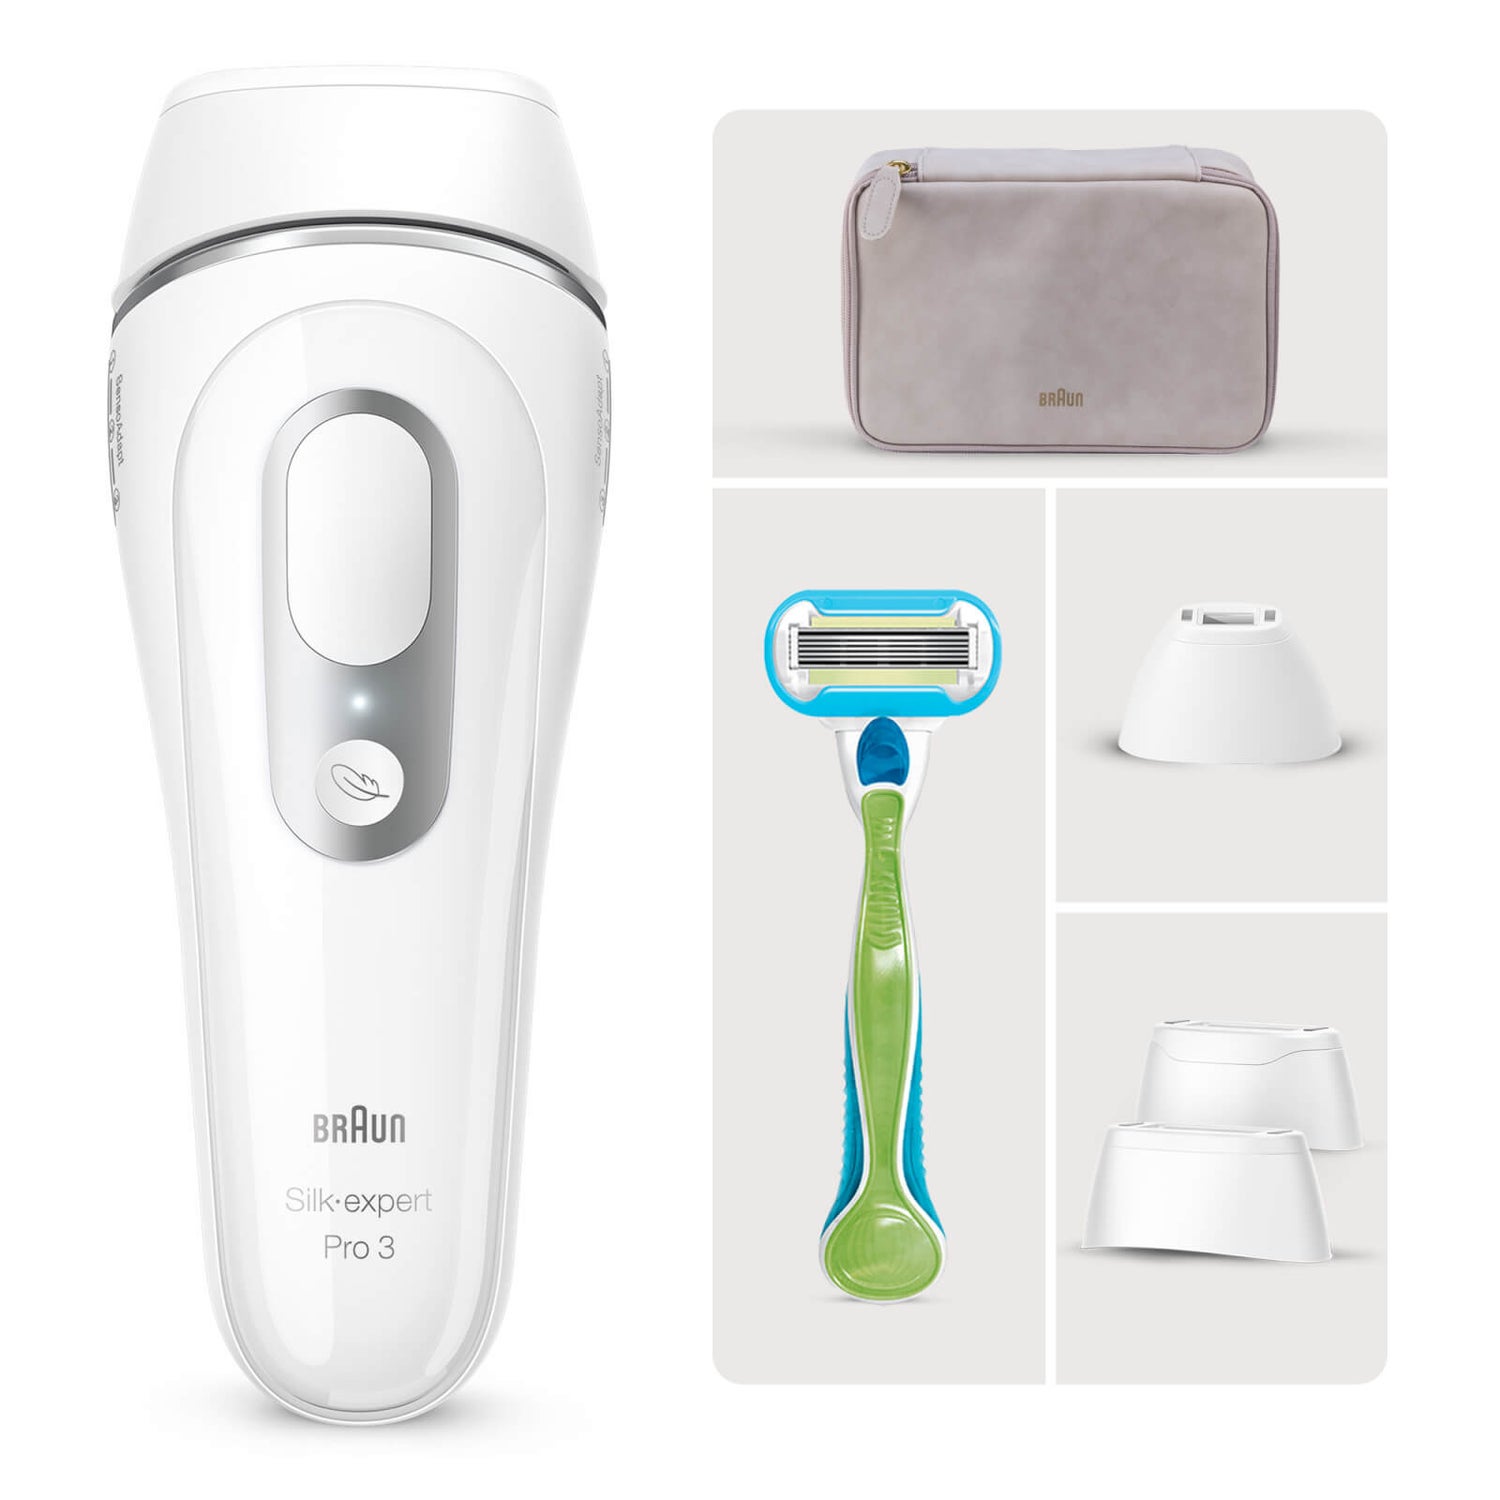 Braun Silk-expert Pro 5 IPL Hair Removal System for sale online